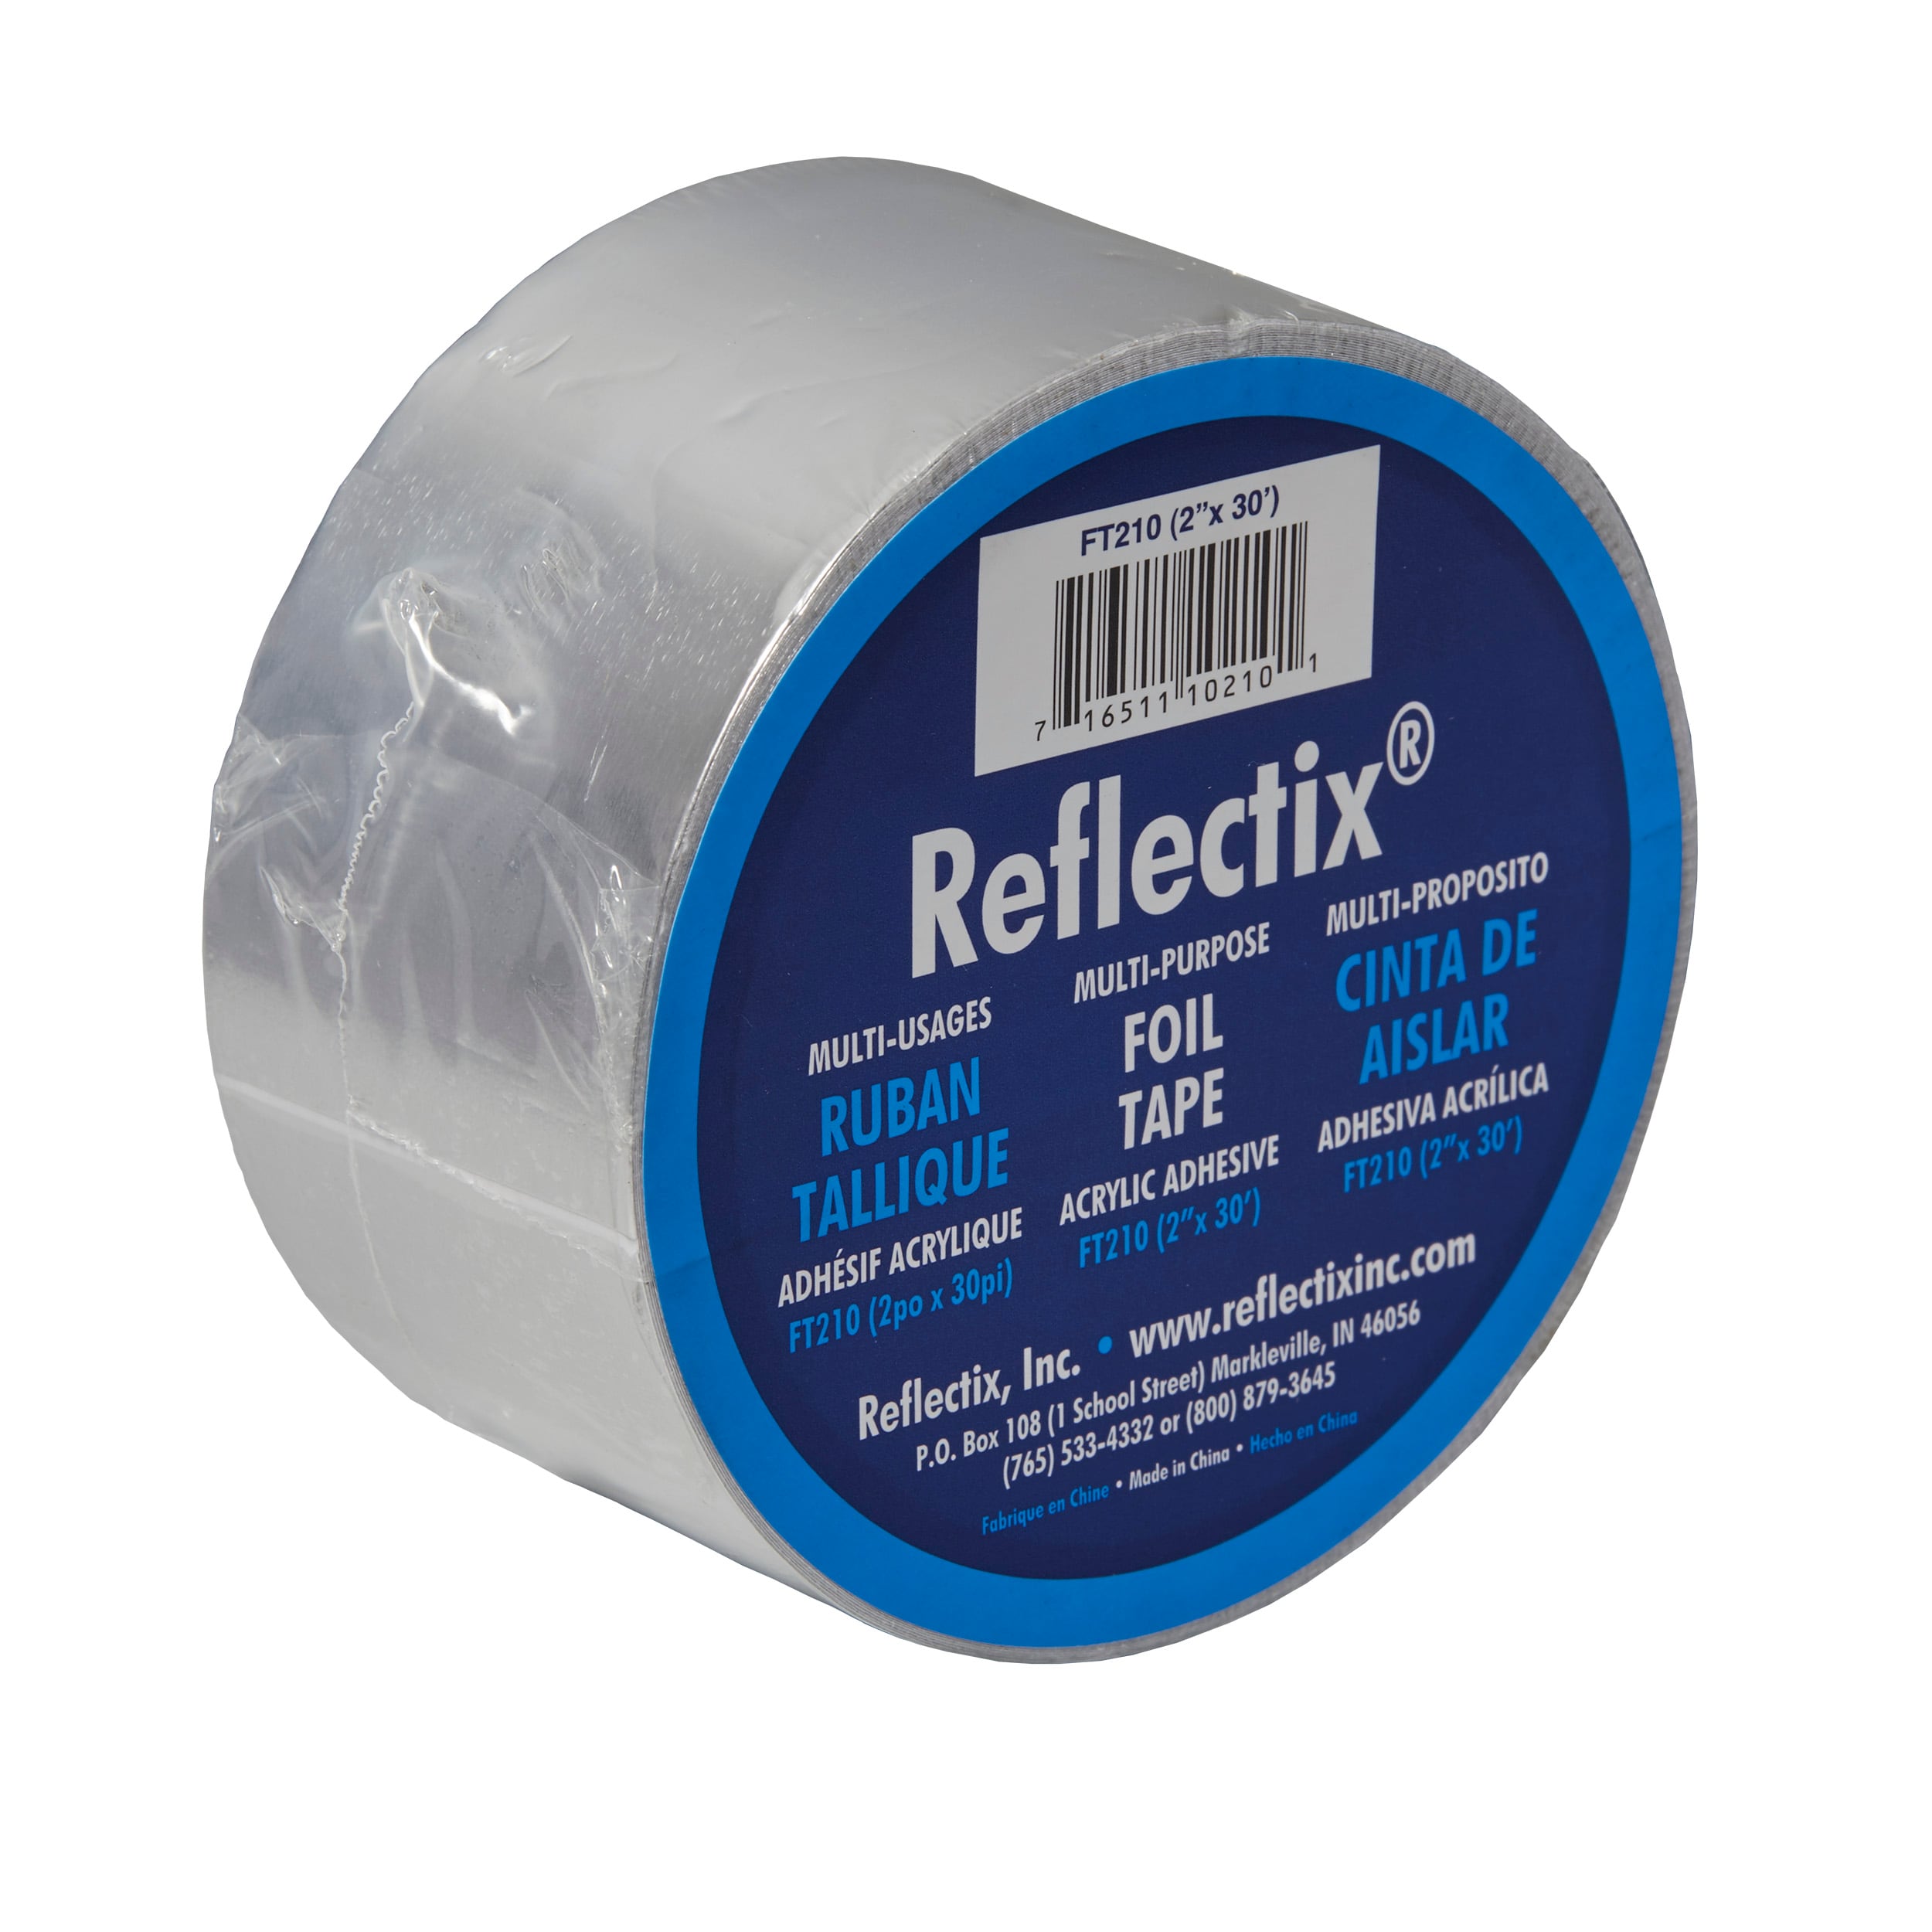 Foil Tape Reflective Insulation by Reflectix Inc 2" x 30' Multi Purpose FT210 